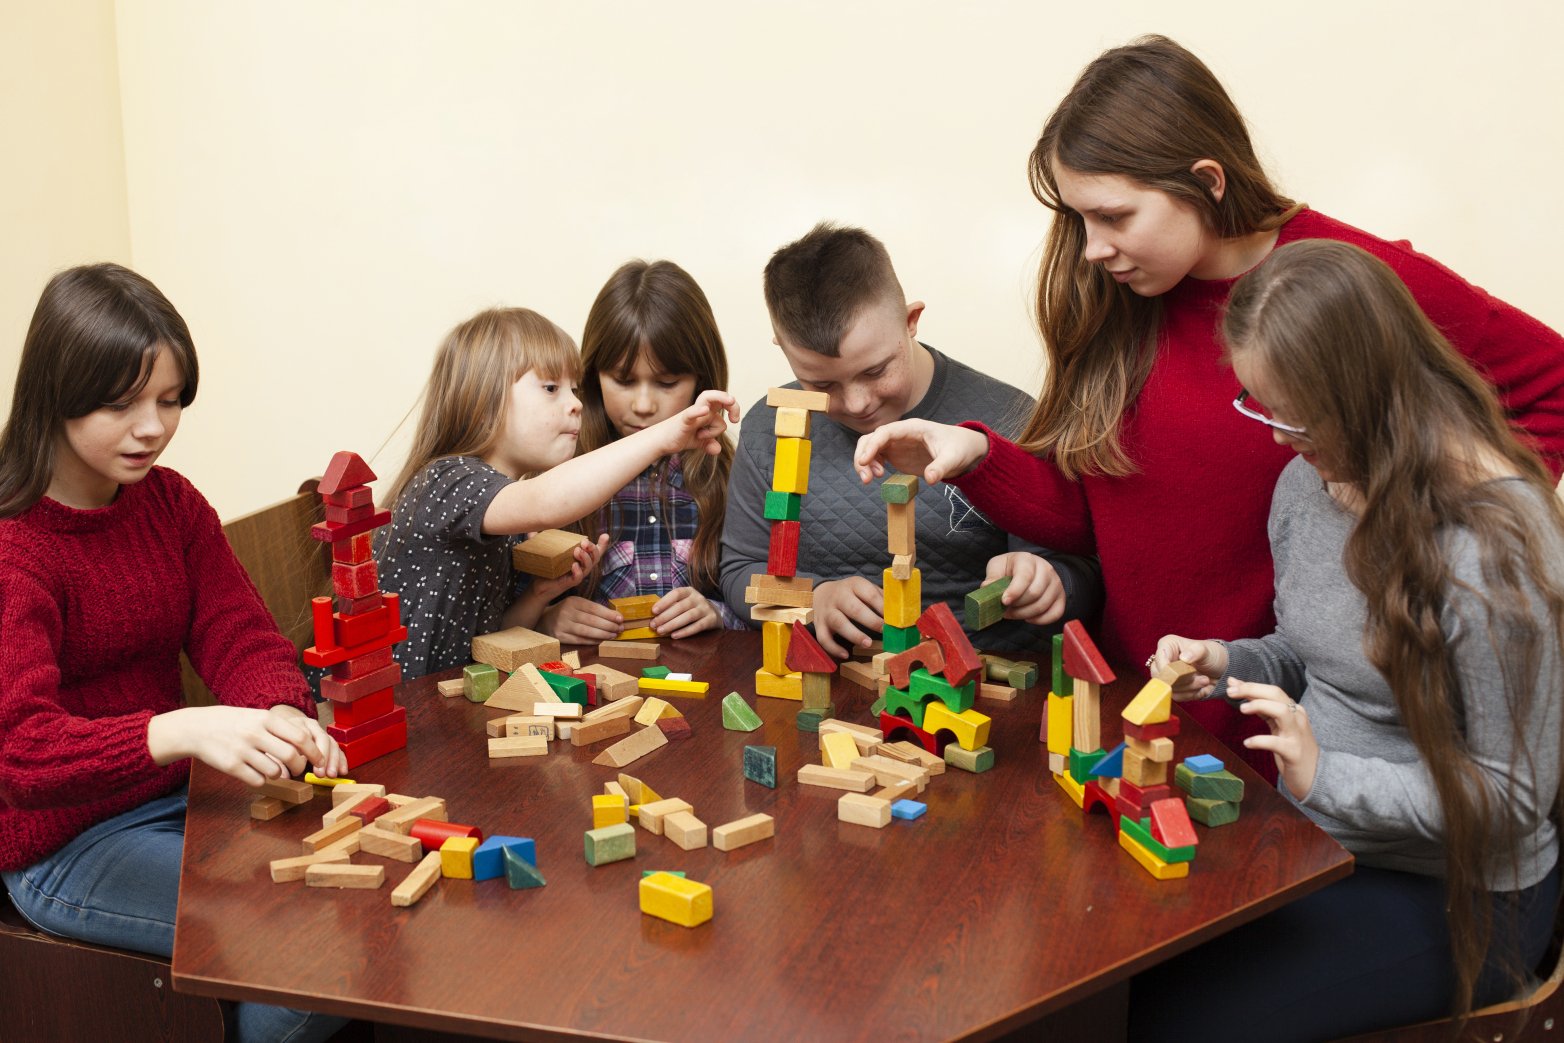 08 - STOCK - Children-with-down-syndrome-playing-with-toys.jpg